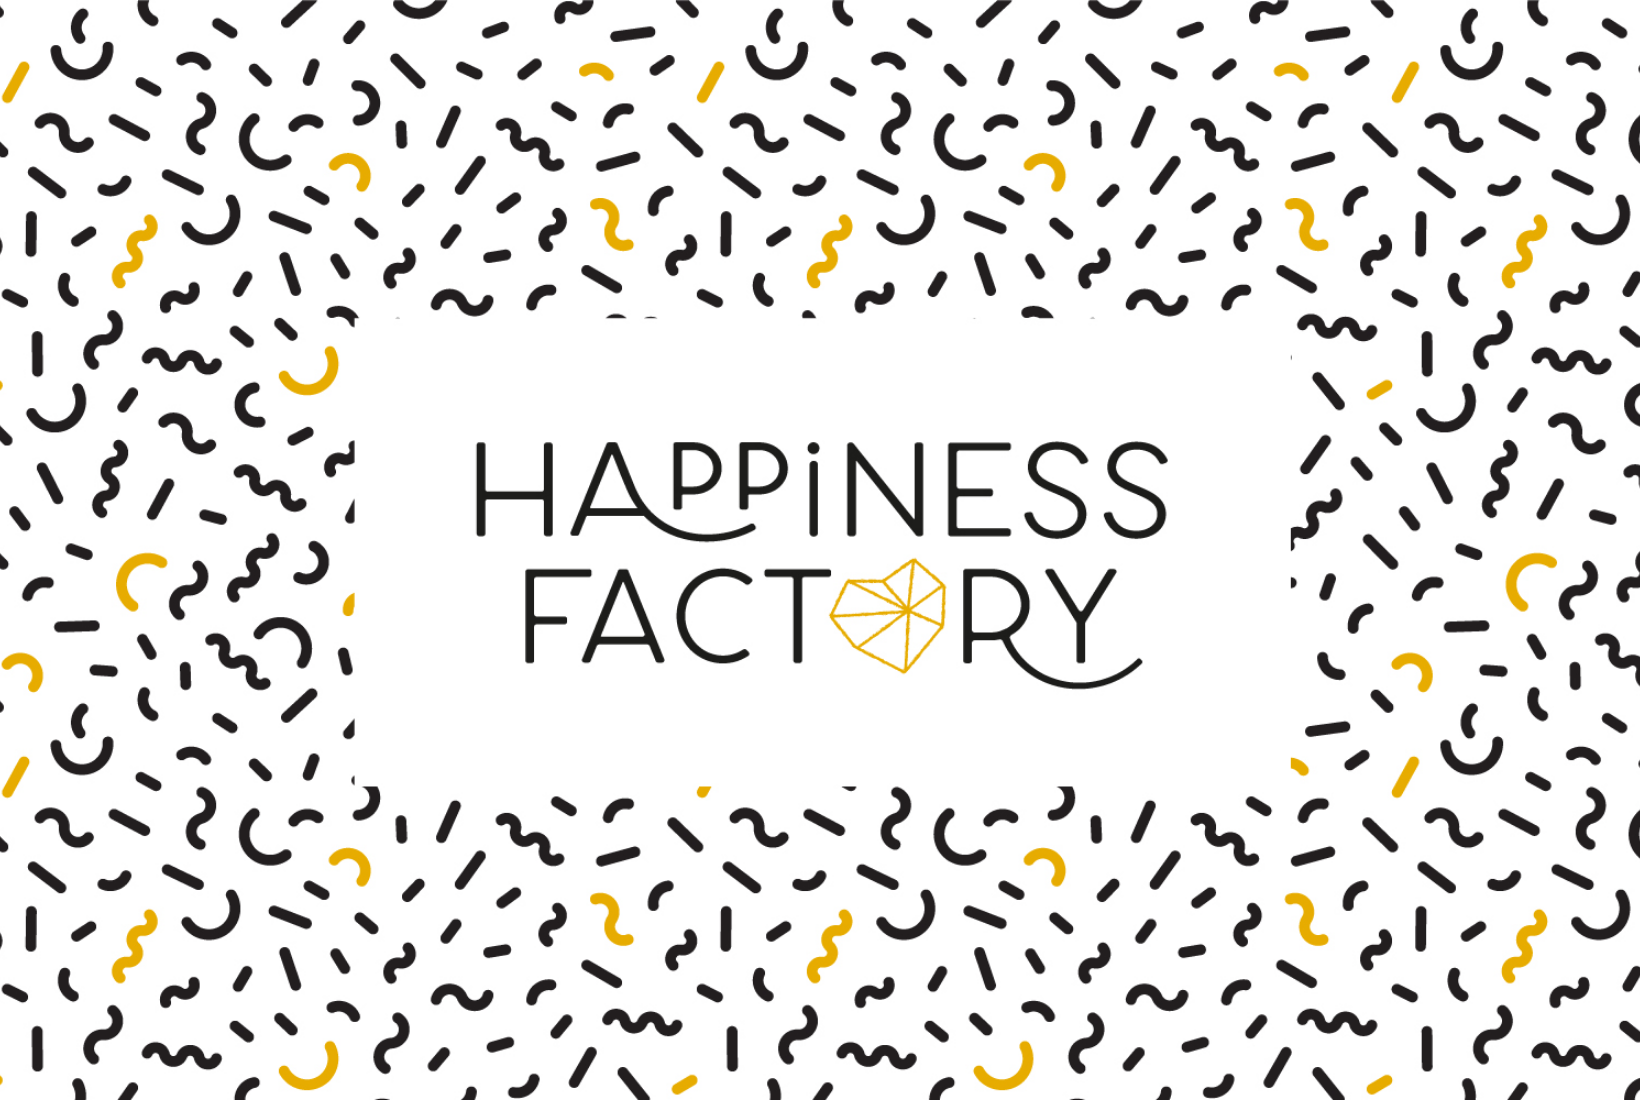 Happyness factory